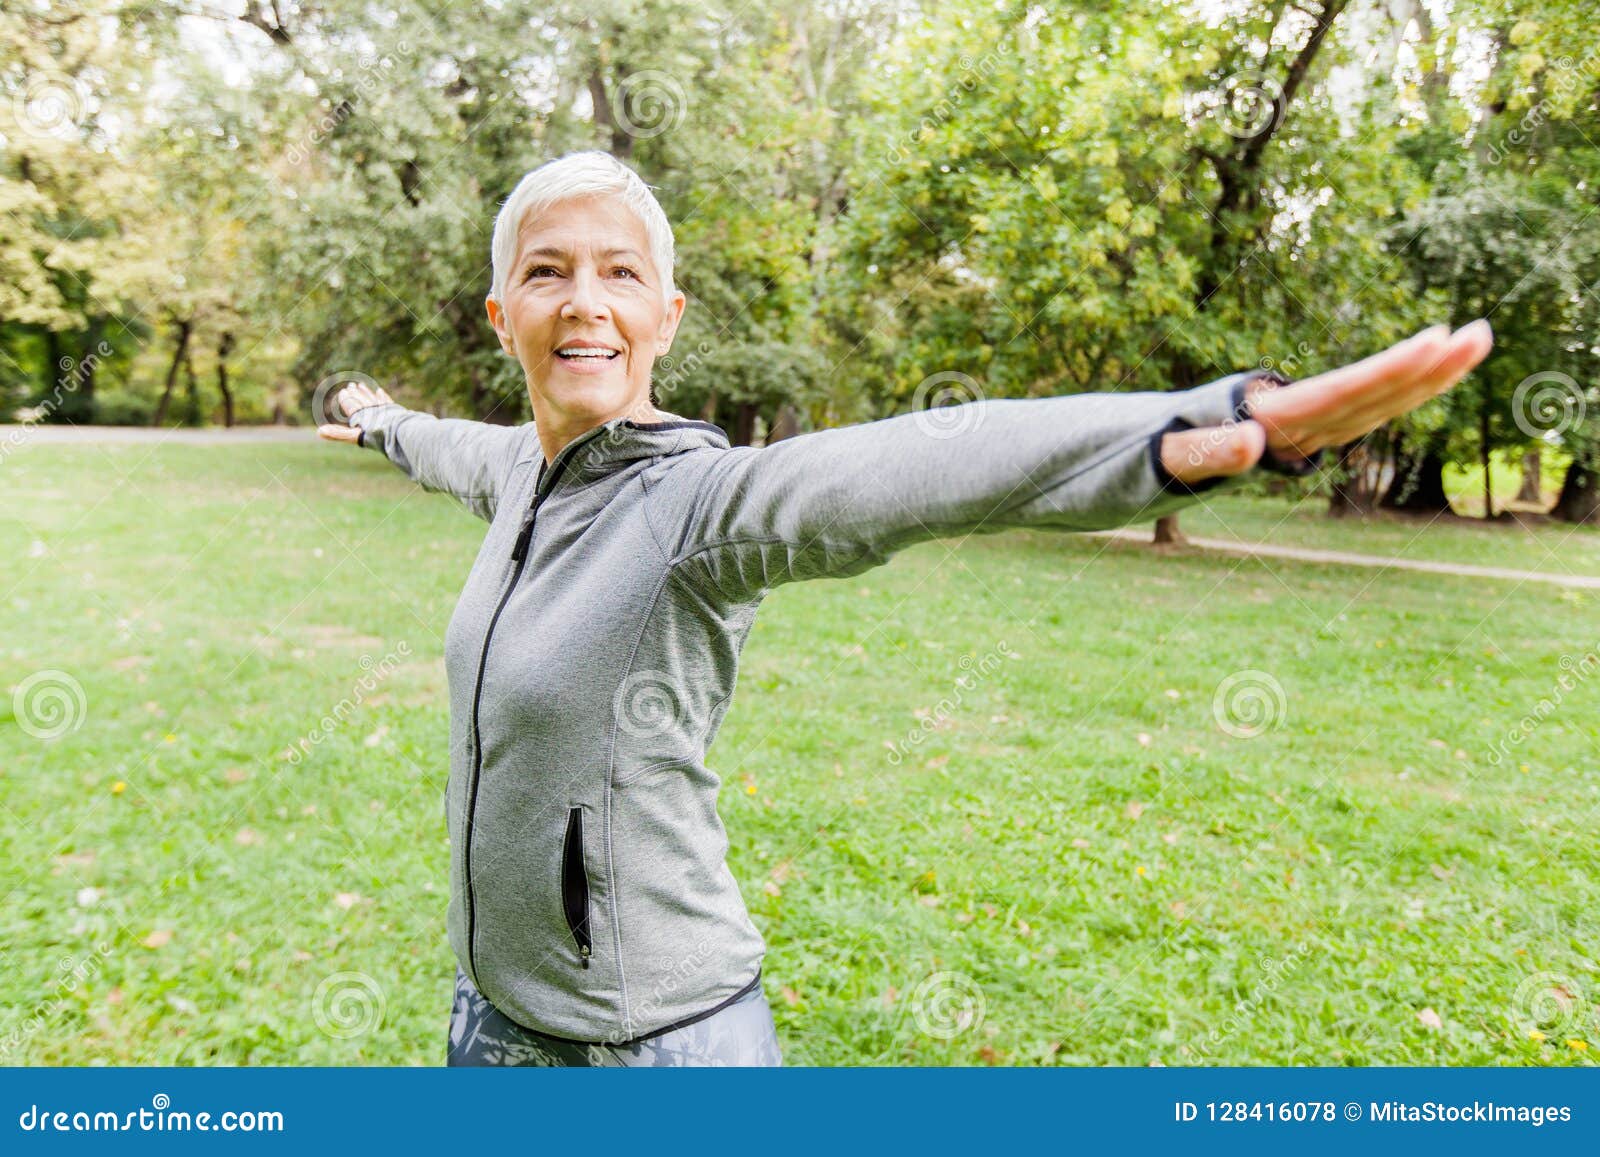 Healthy Senior Fit Woman Doing Exercise in Nature Stock Photo - Image of fitness, healthcare: 128416078